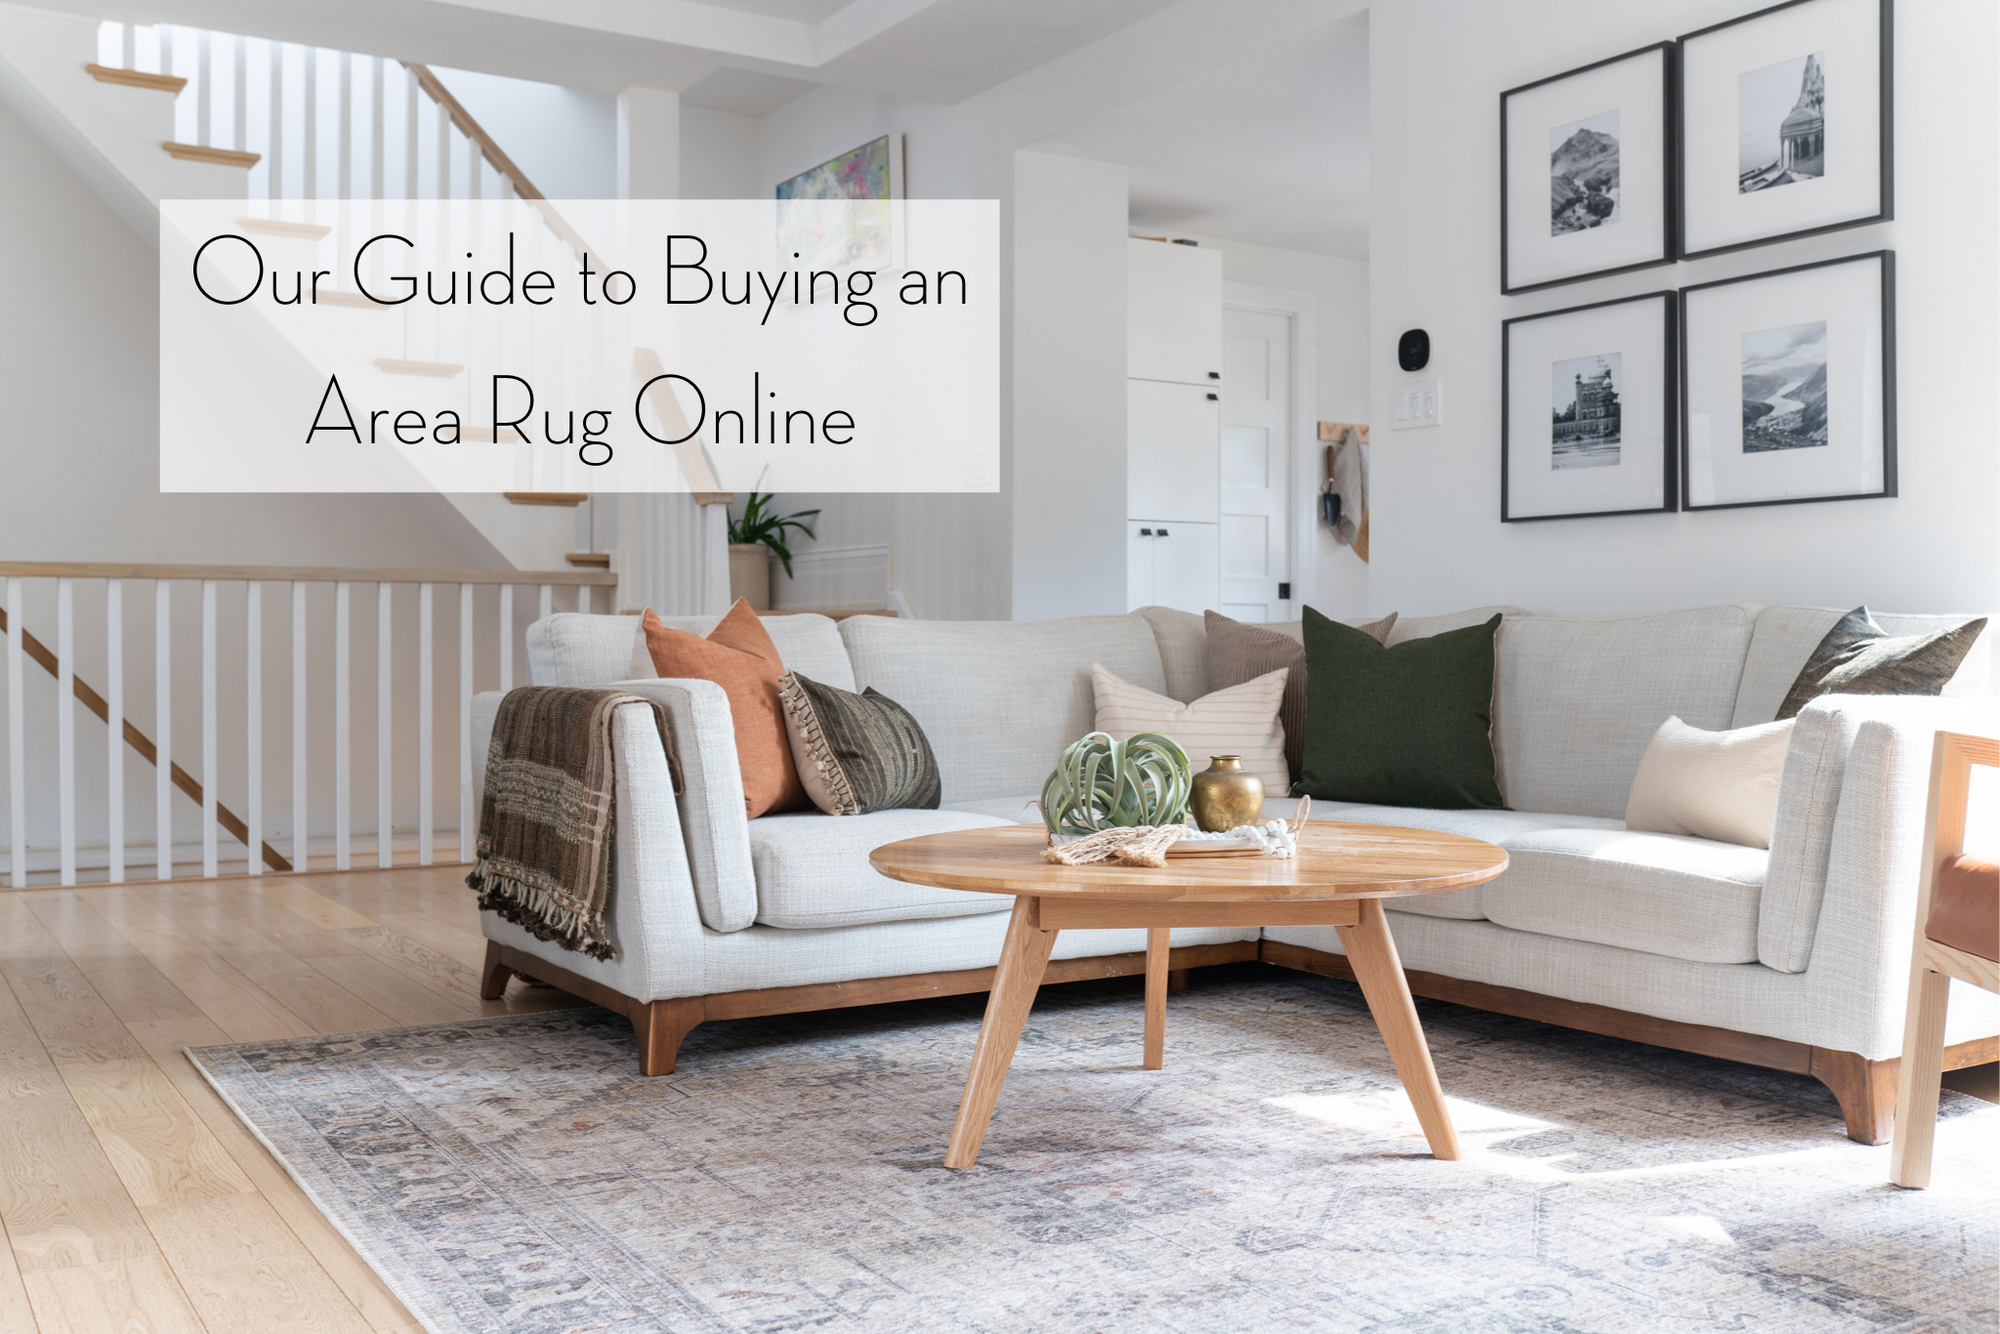 Our Guide to Buying an Area Rug Online